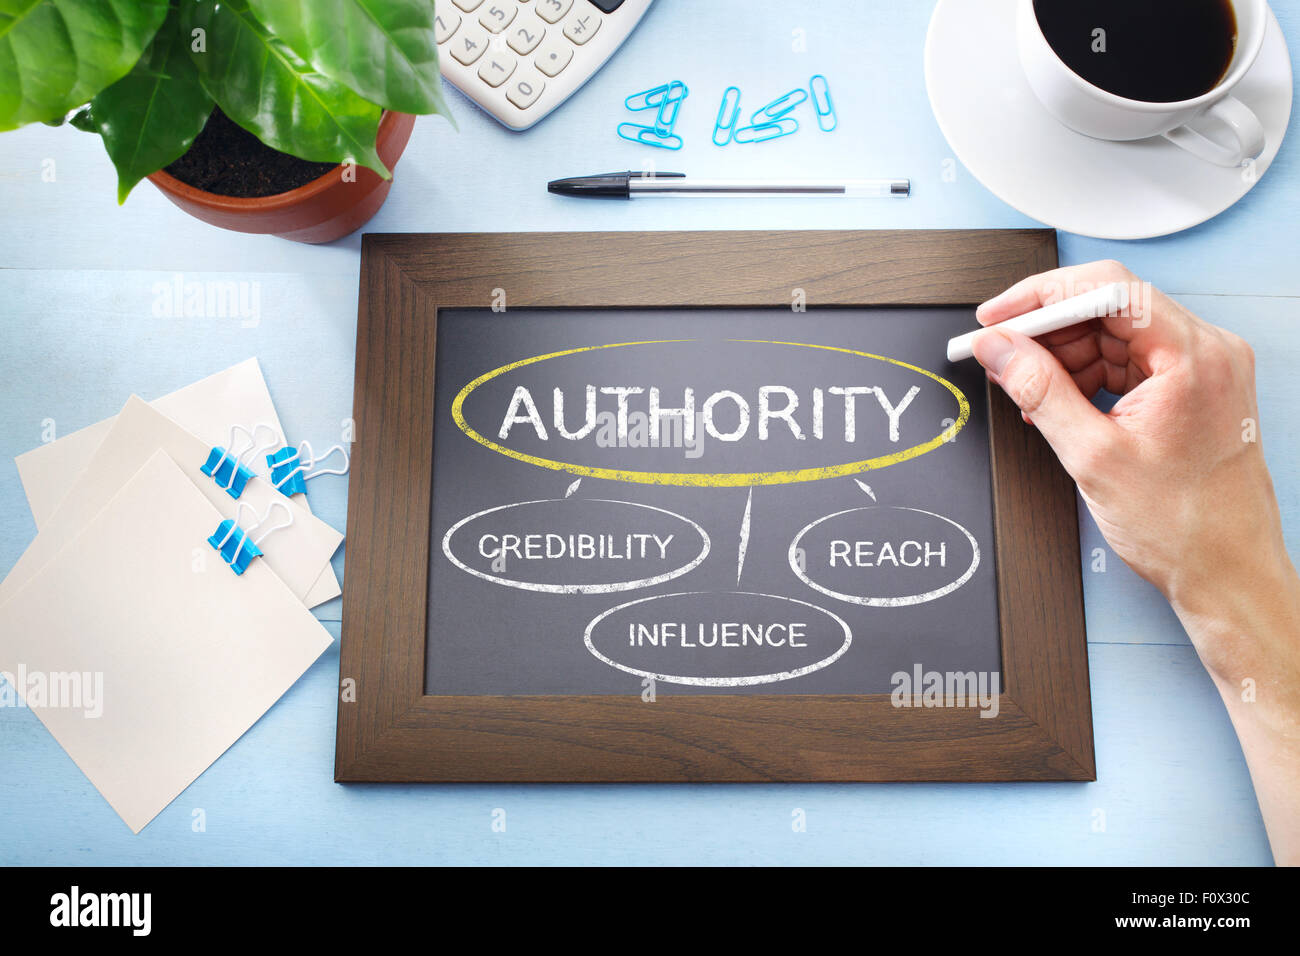 Authority and its sources mapped out on a blackboard Stock Photo